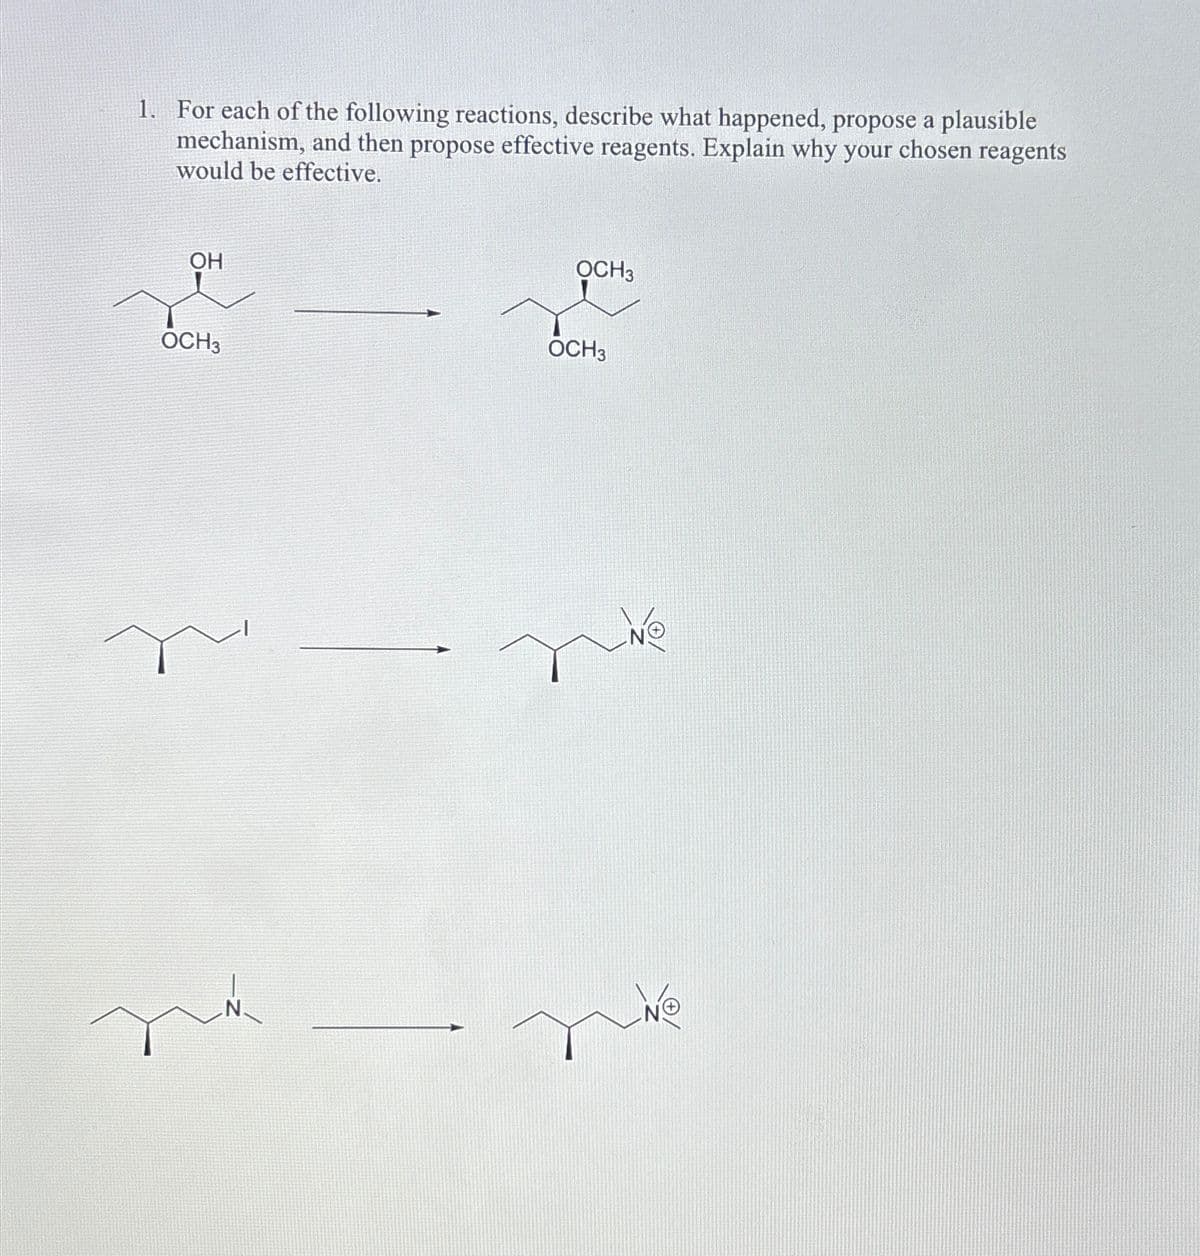 1. For each of the following reactions, describe what happened, propose a plausible
mechanism, and then propose effective reagents. Explain why your chosen reagents
would be effective.
OH
OCH3
OCH3
OCH 3
NⓇ